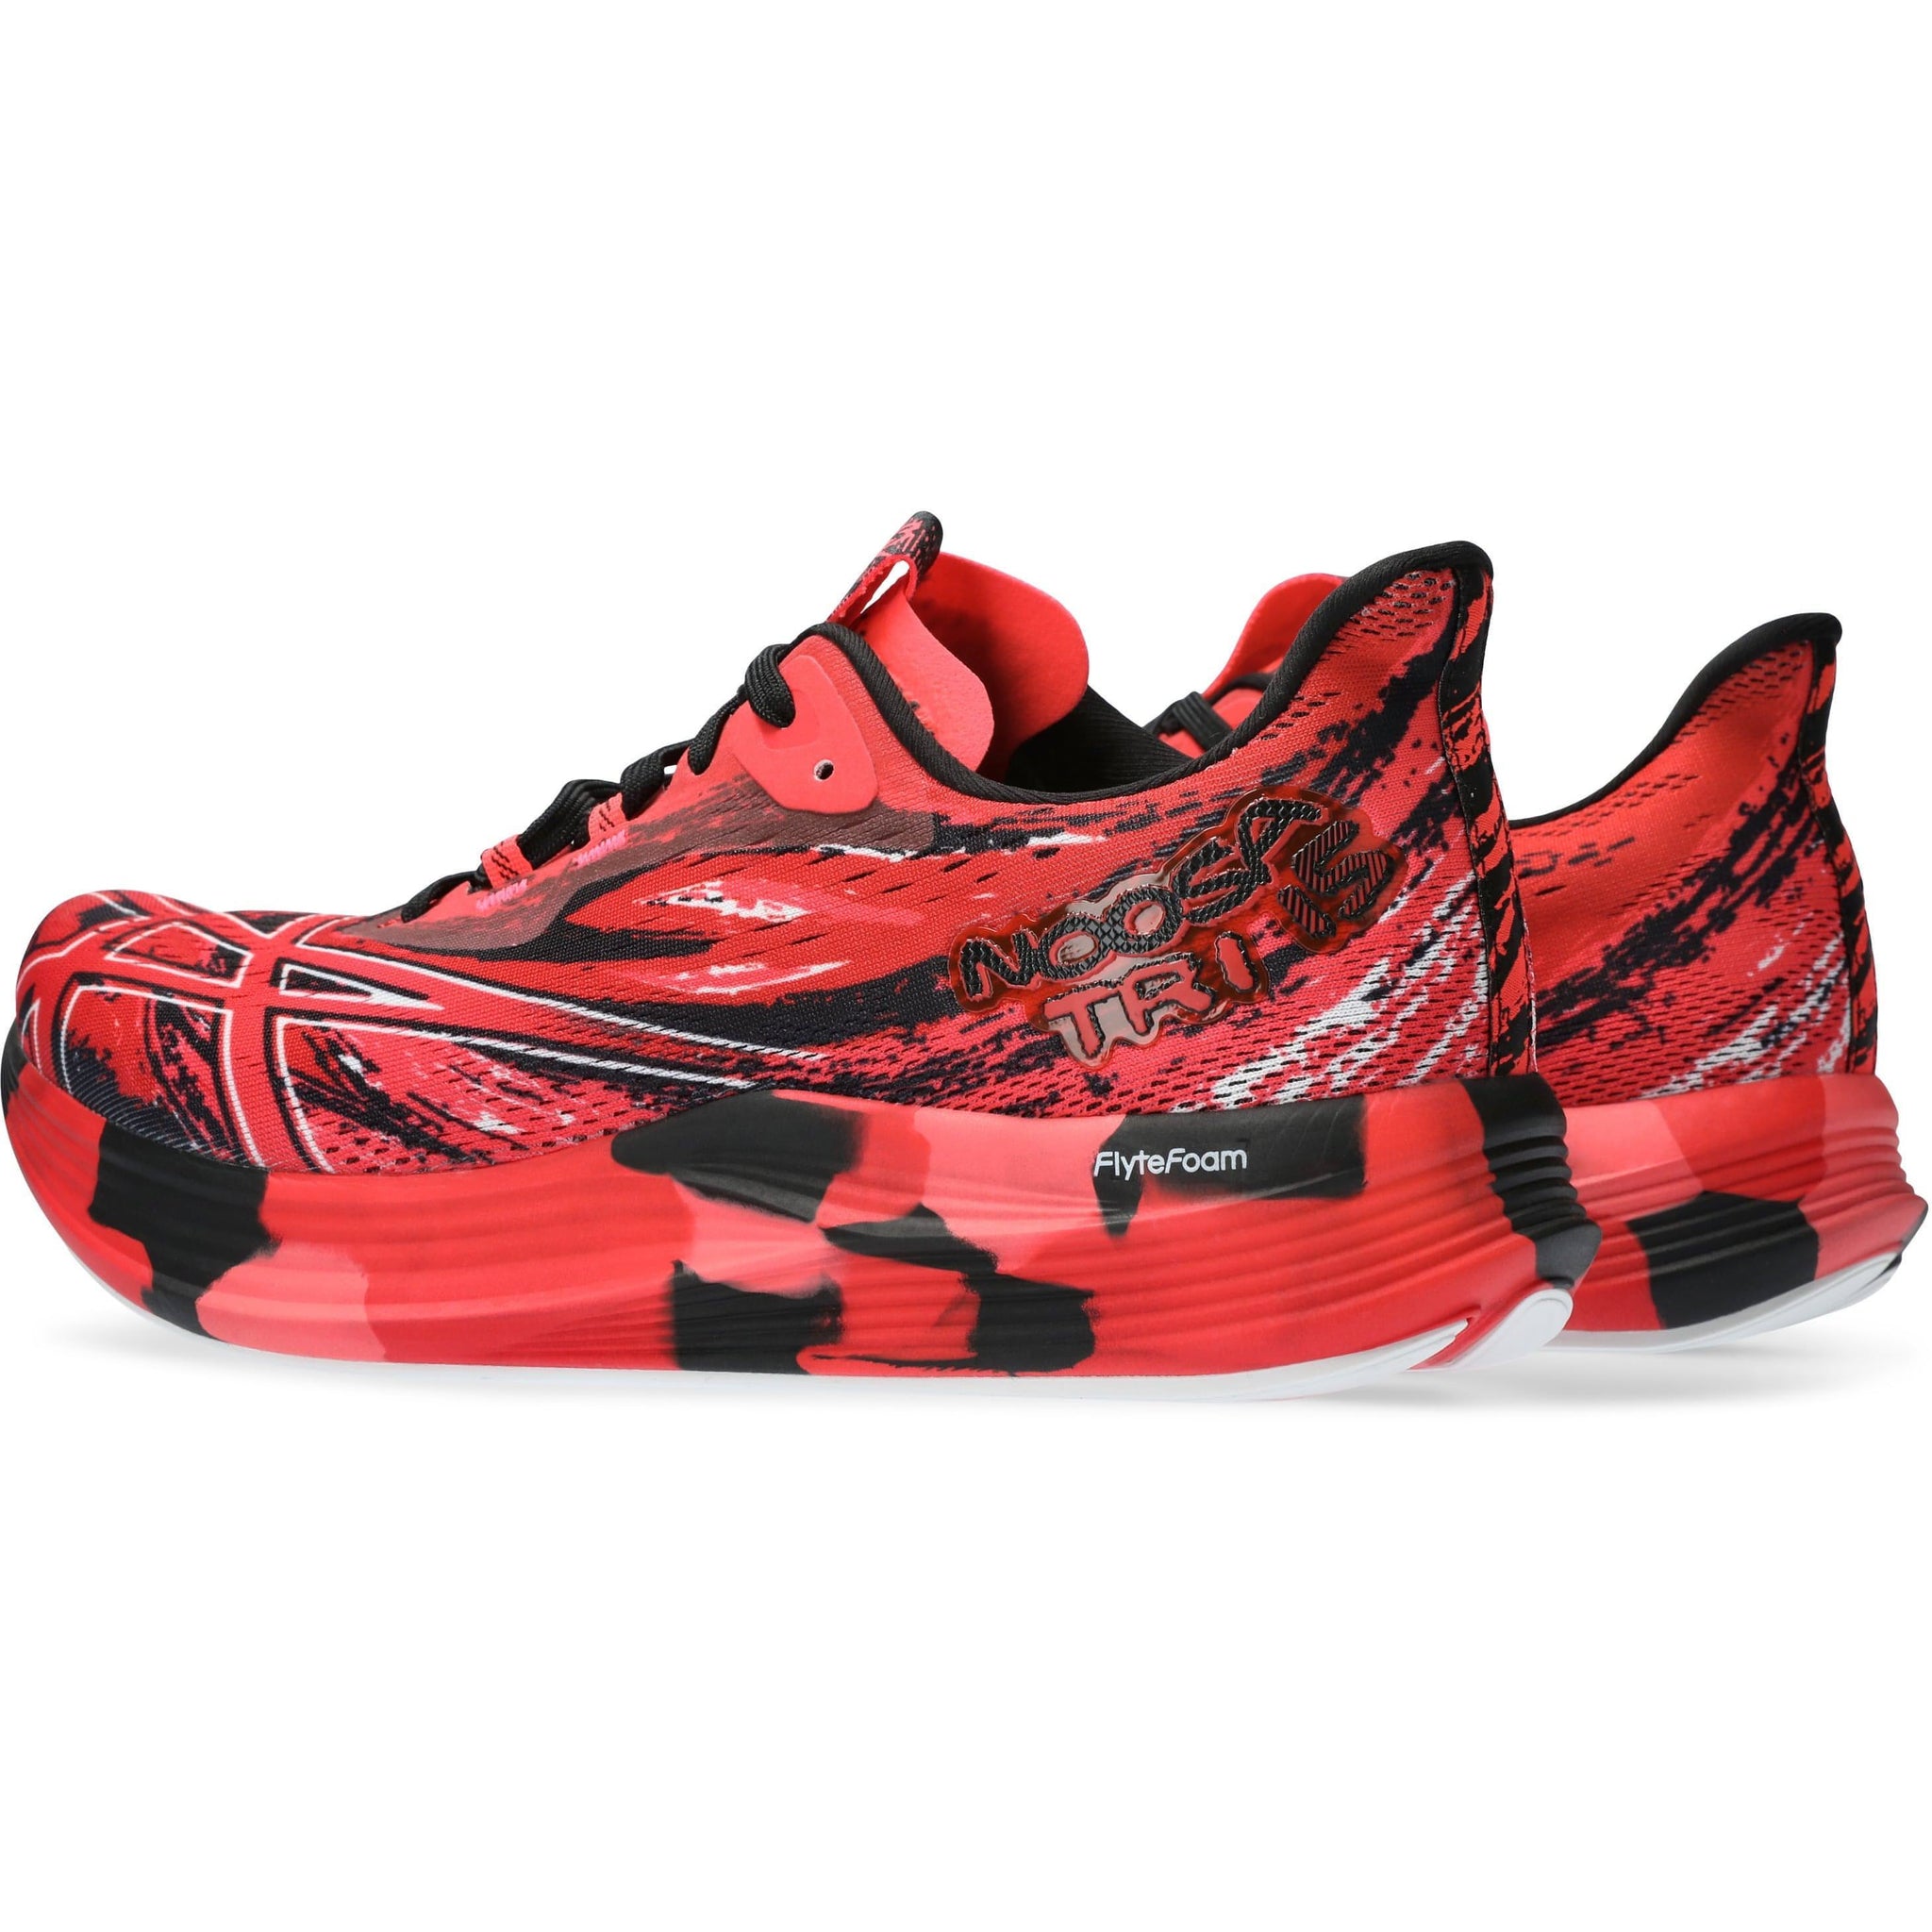 Asics Noosa Tri 15 Mens Running Shoes - Red